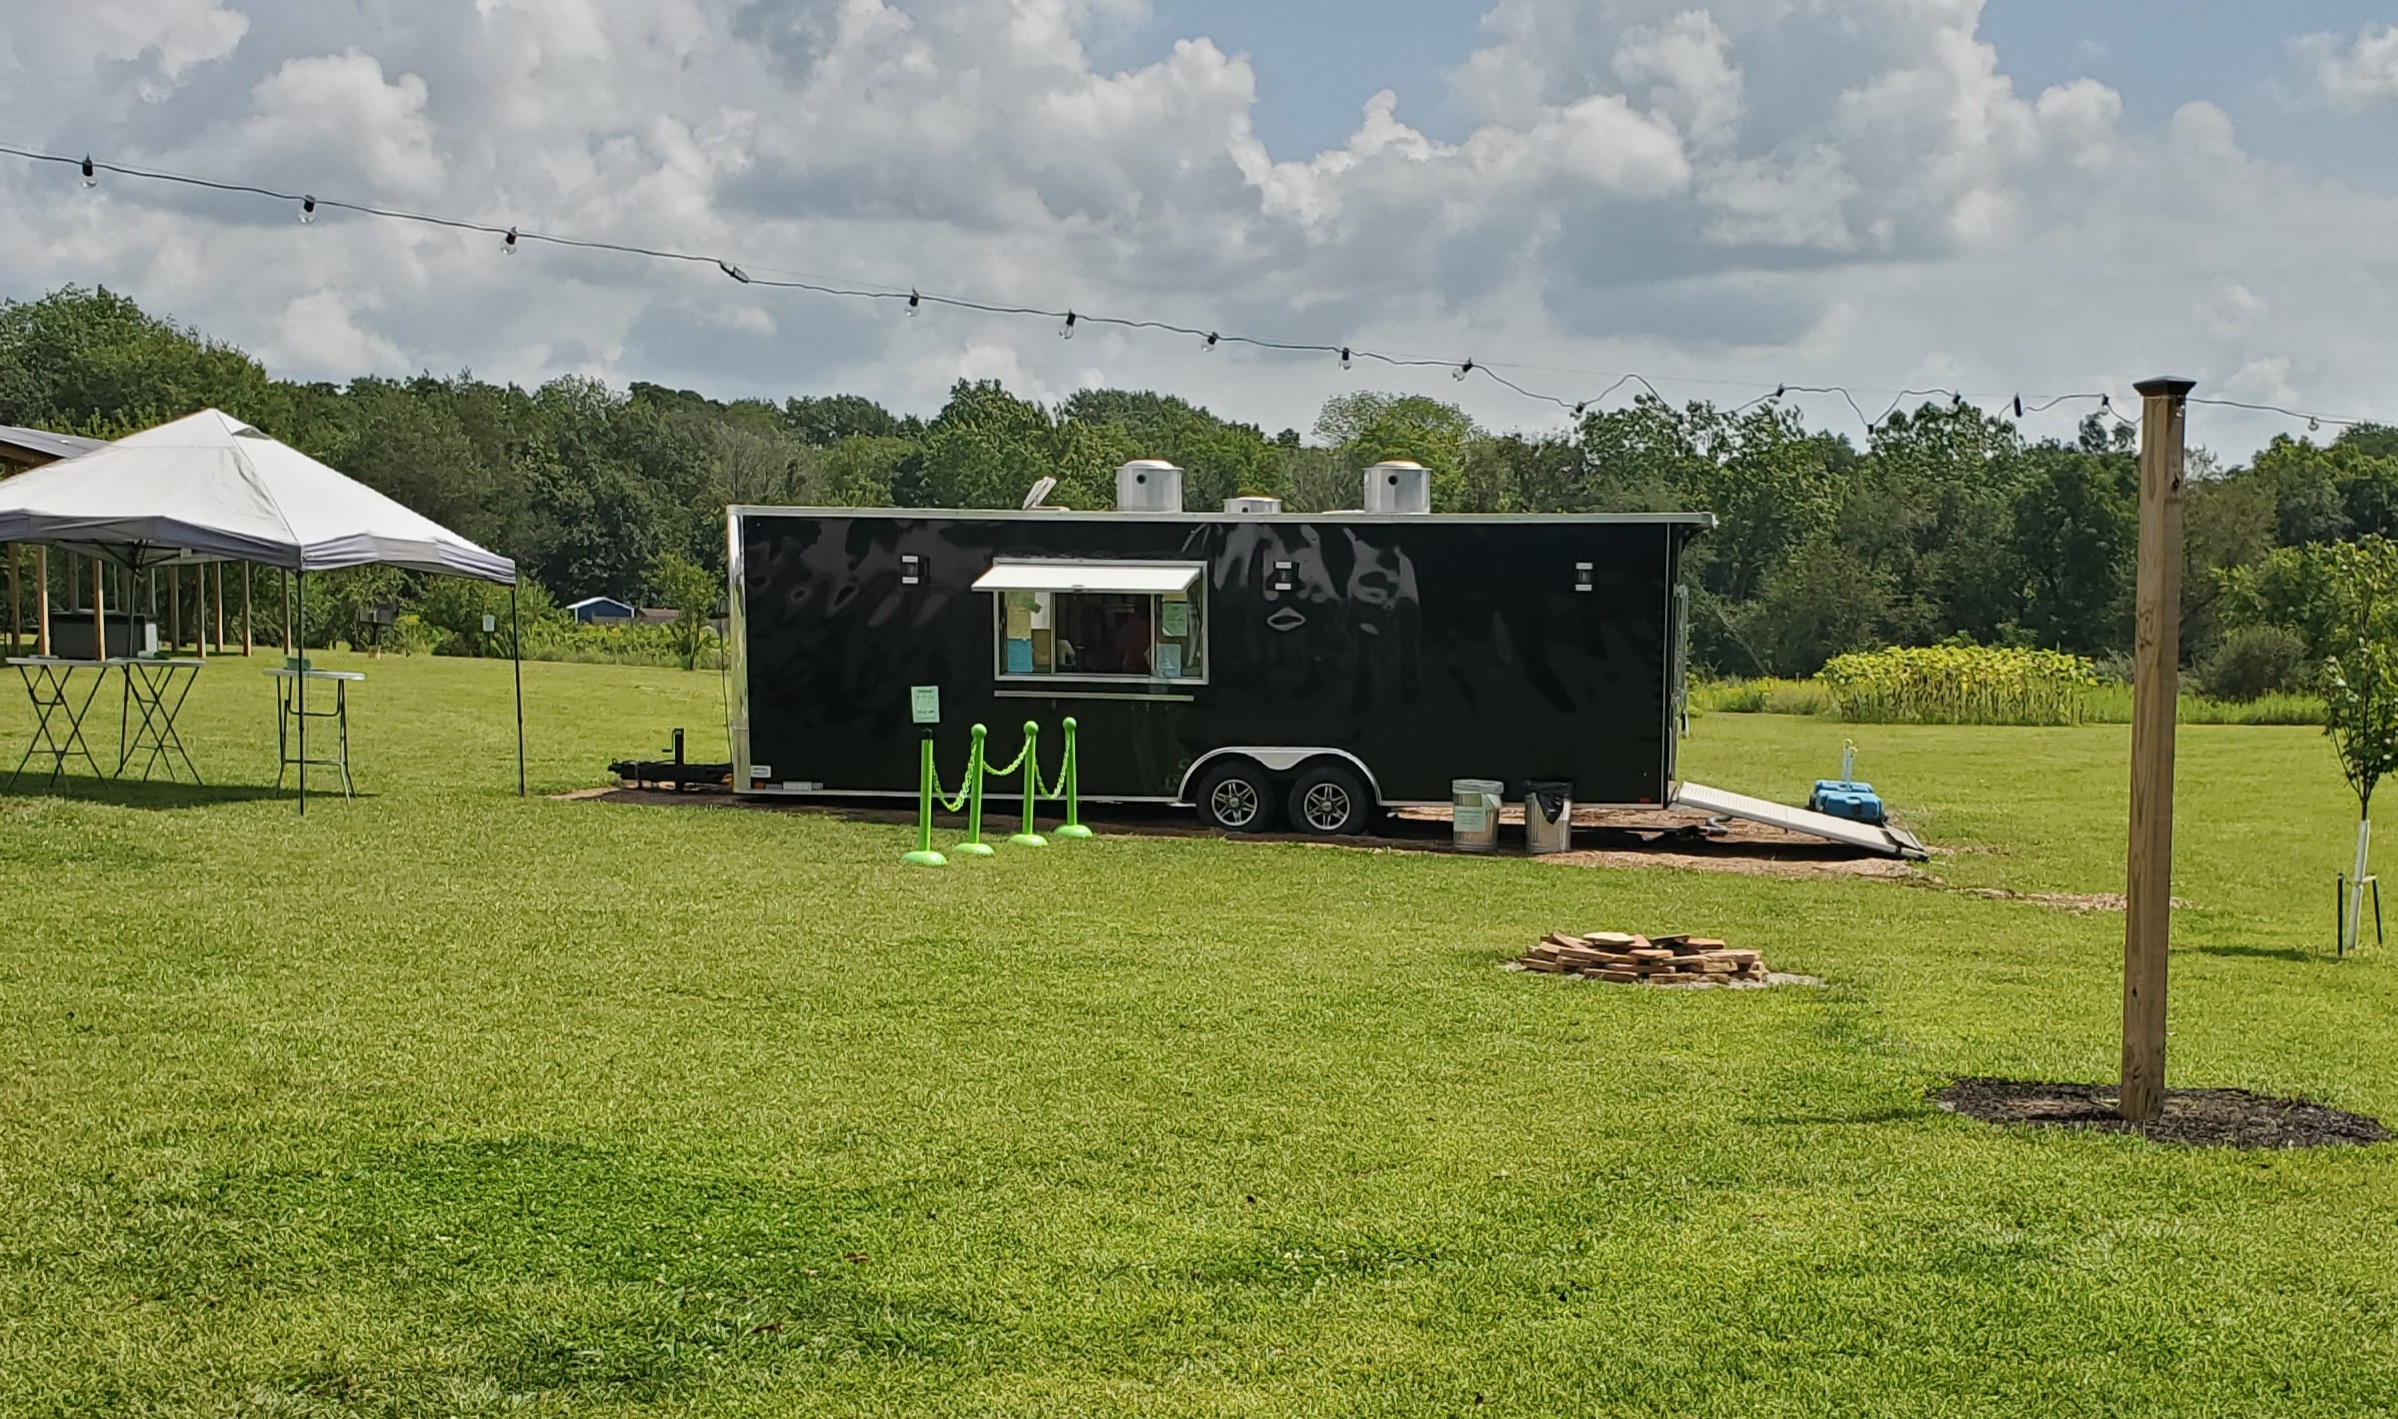 A black food truck is parked in the grass on a sunny day. Photo by Carl Busch.